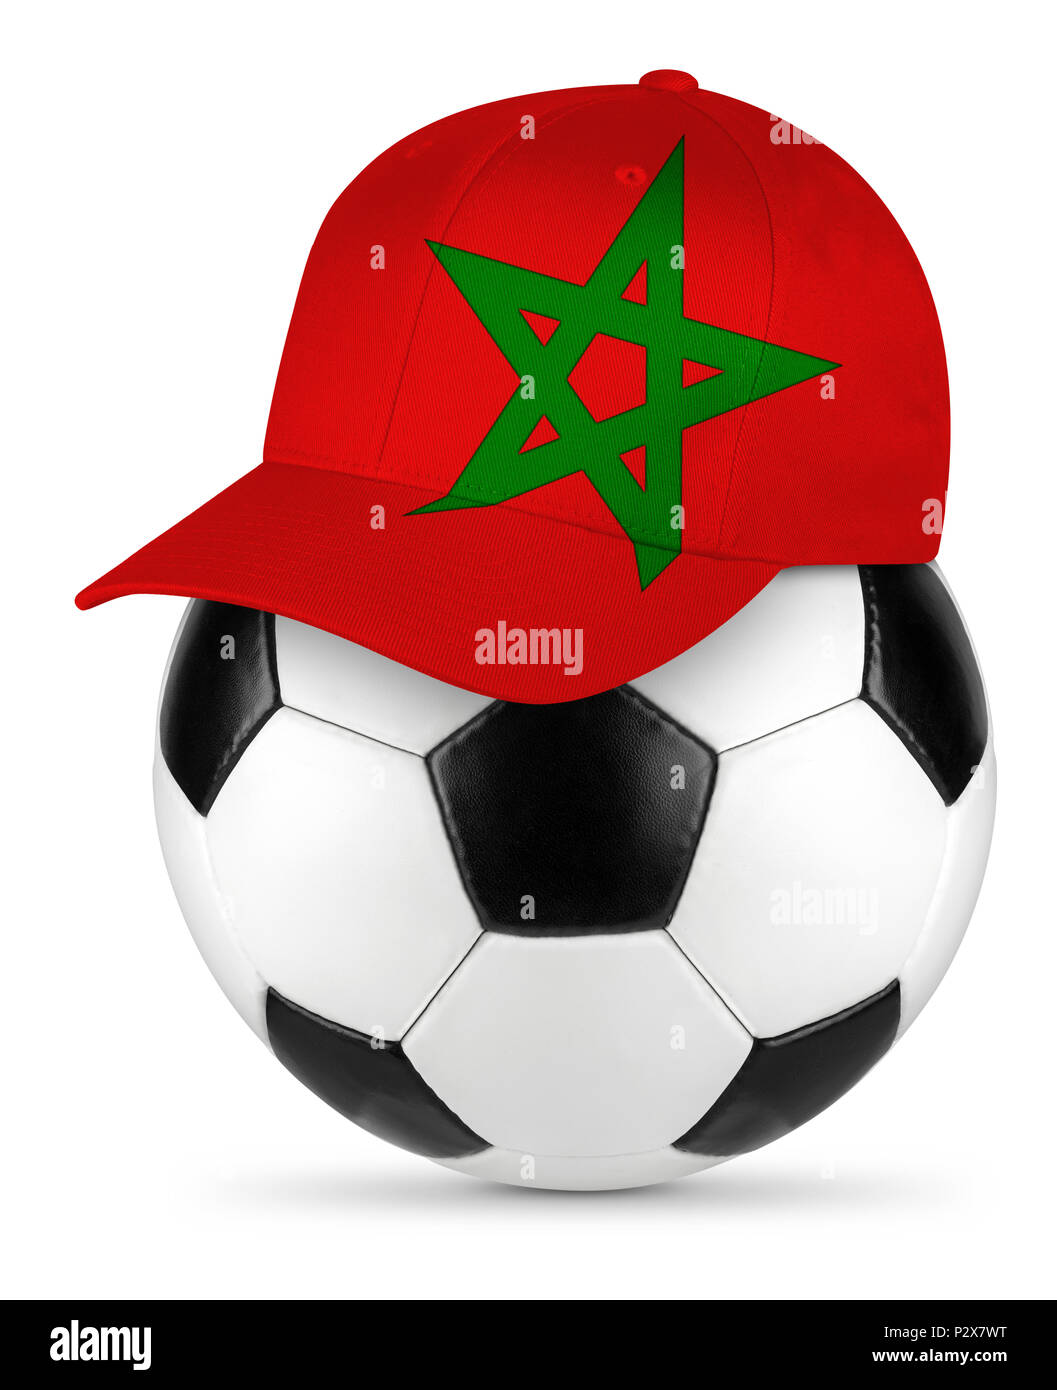 Classic black white leather soccer ball with Morocco baseball fan cap isolated background sport football concept Stock Photo